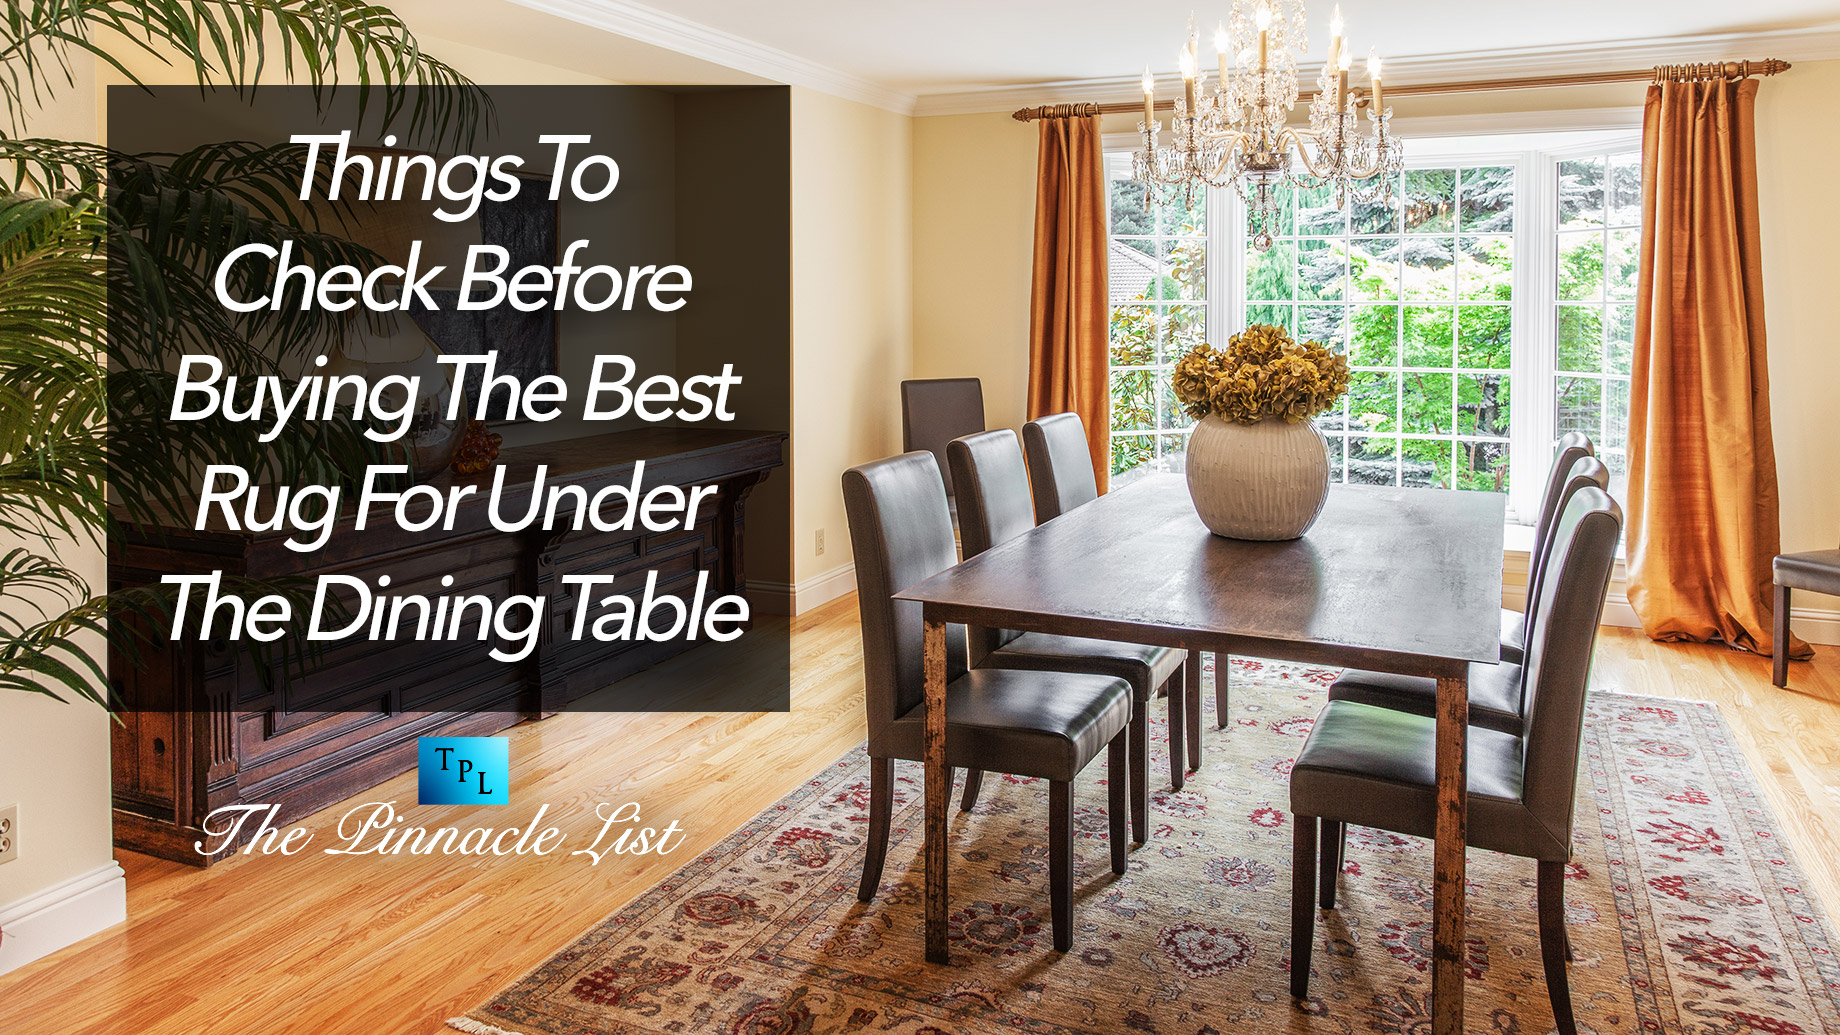 Things To Check Before Buying The Best Rug For Under The Dining Table